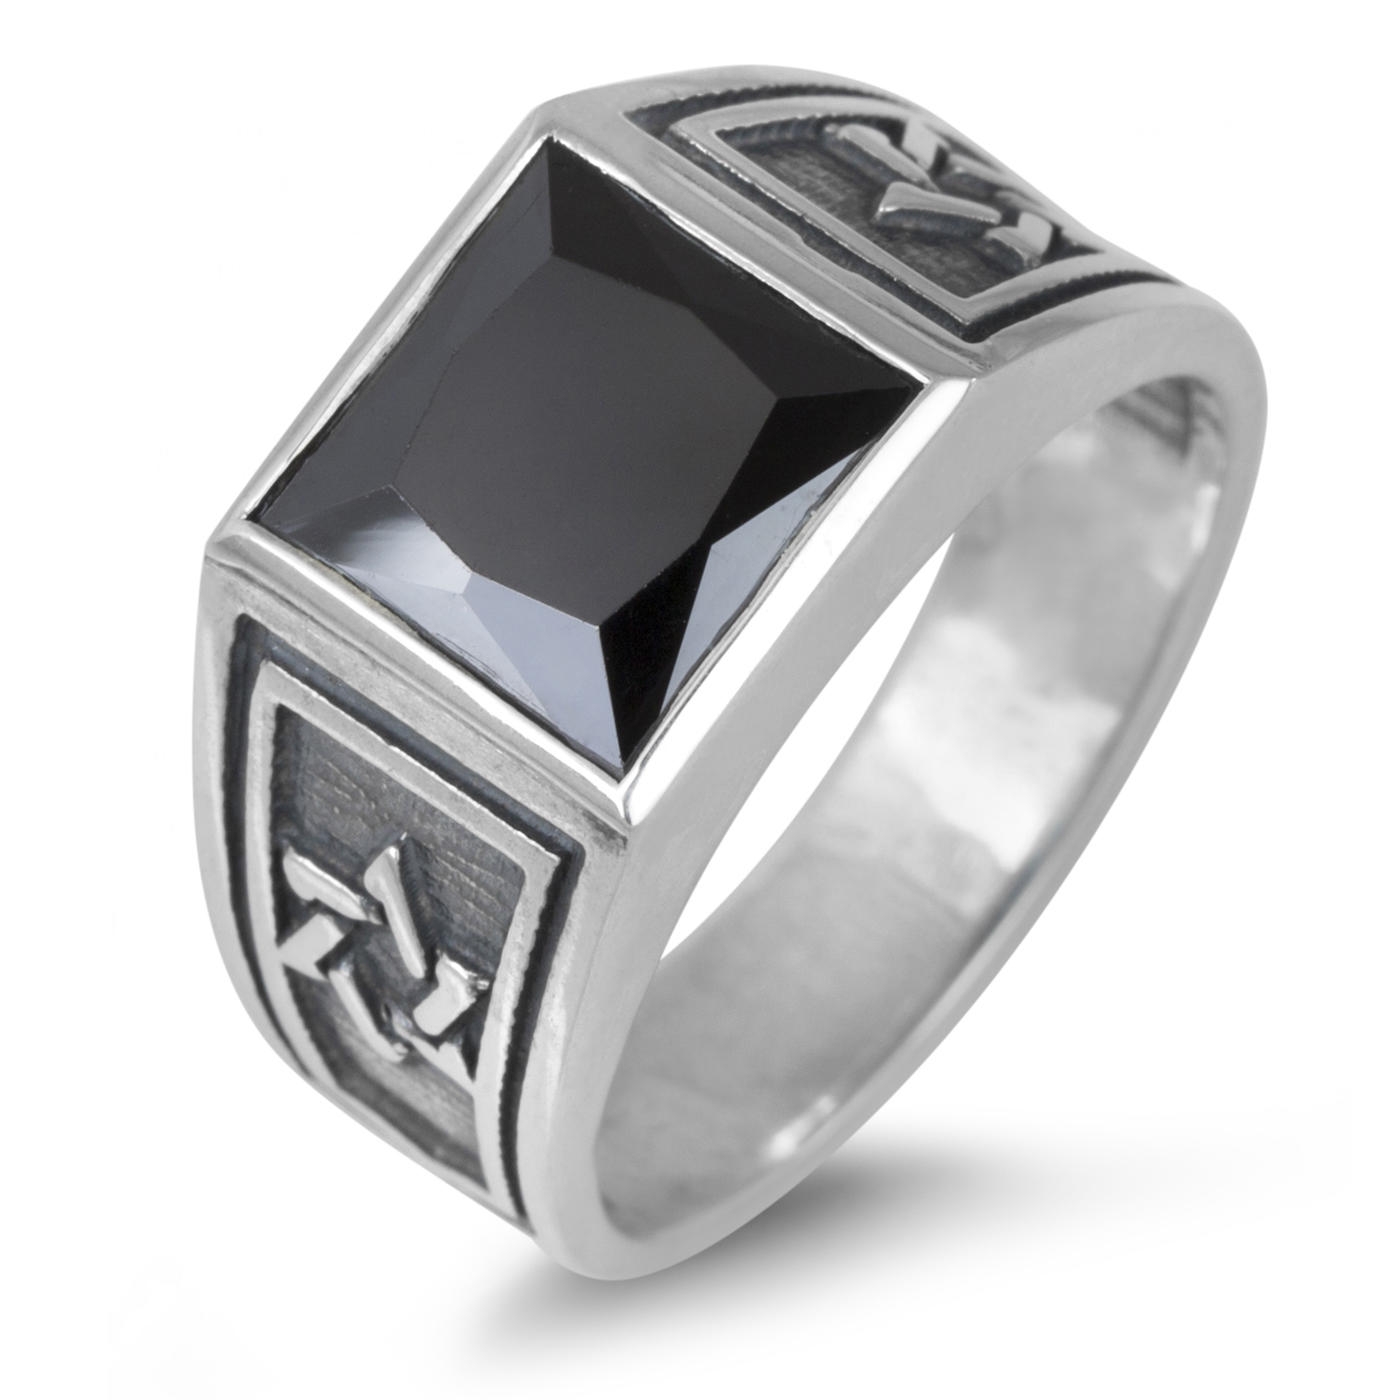 Sterling Silver and Onyx Men's Star of David College Ring - Square - 1